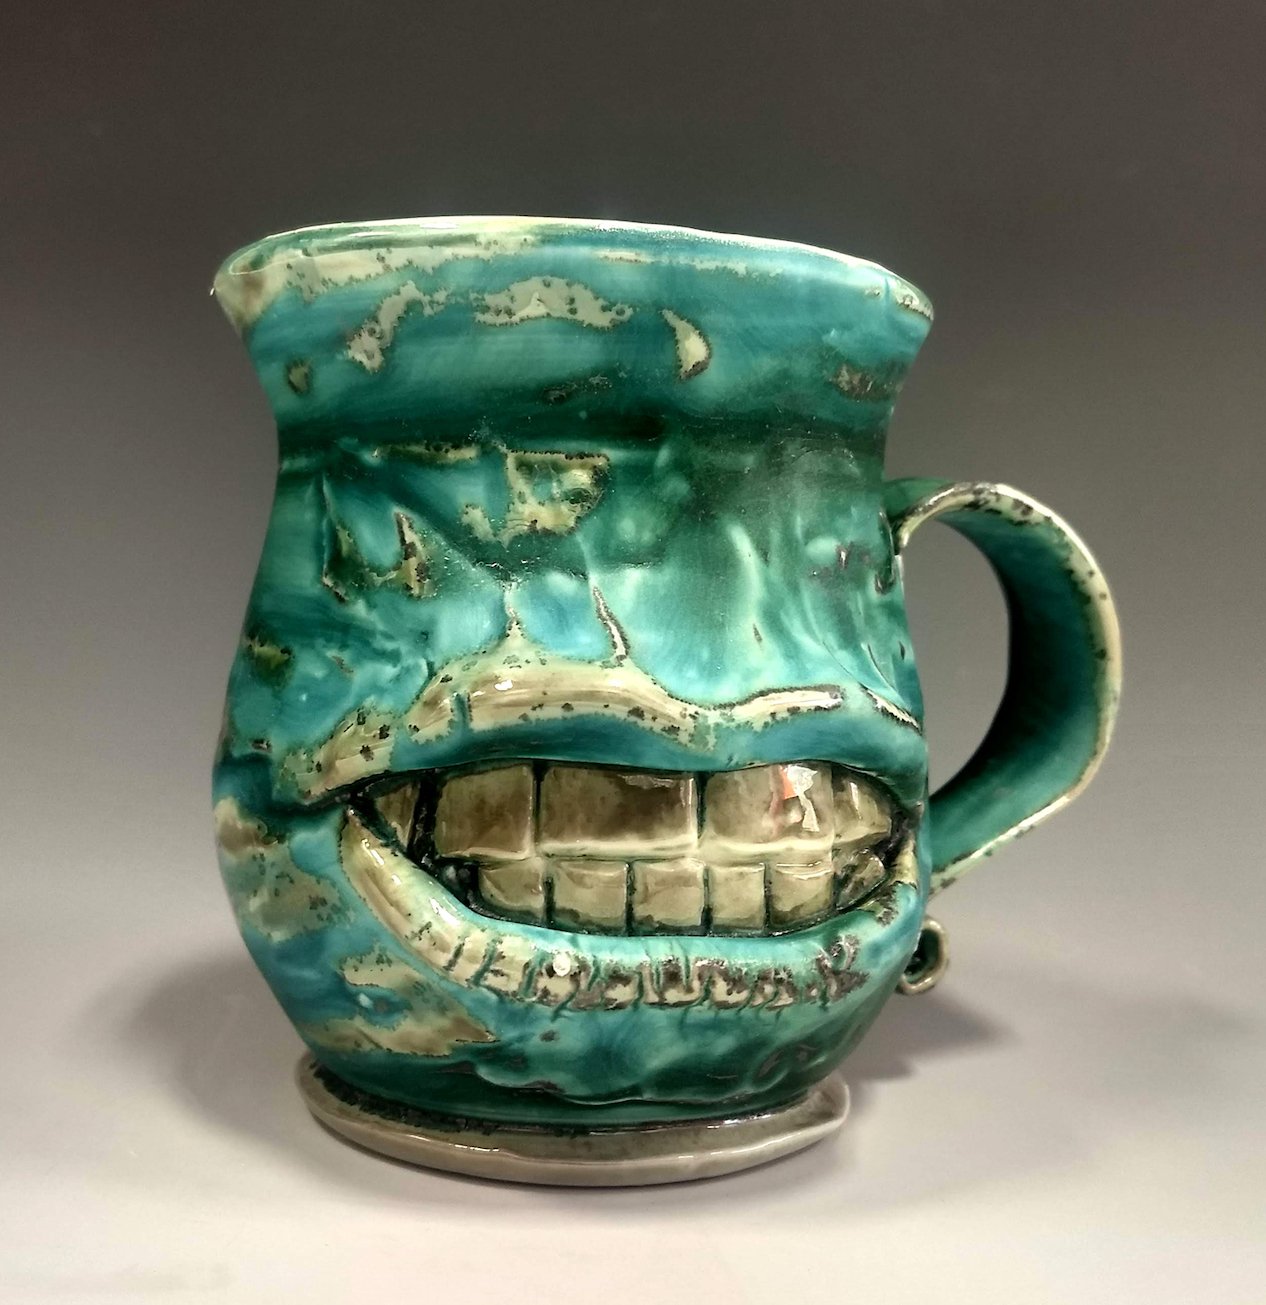    Silver-toothed Face Mug  , 5” x 3” x 3”, ceramic 